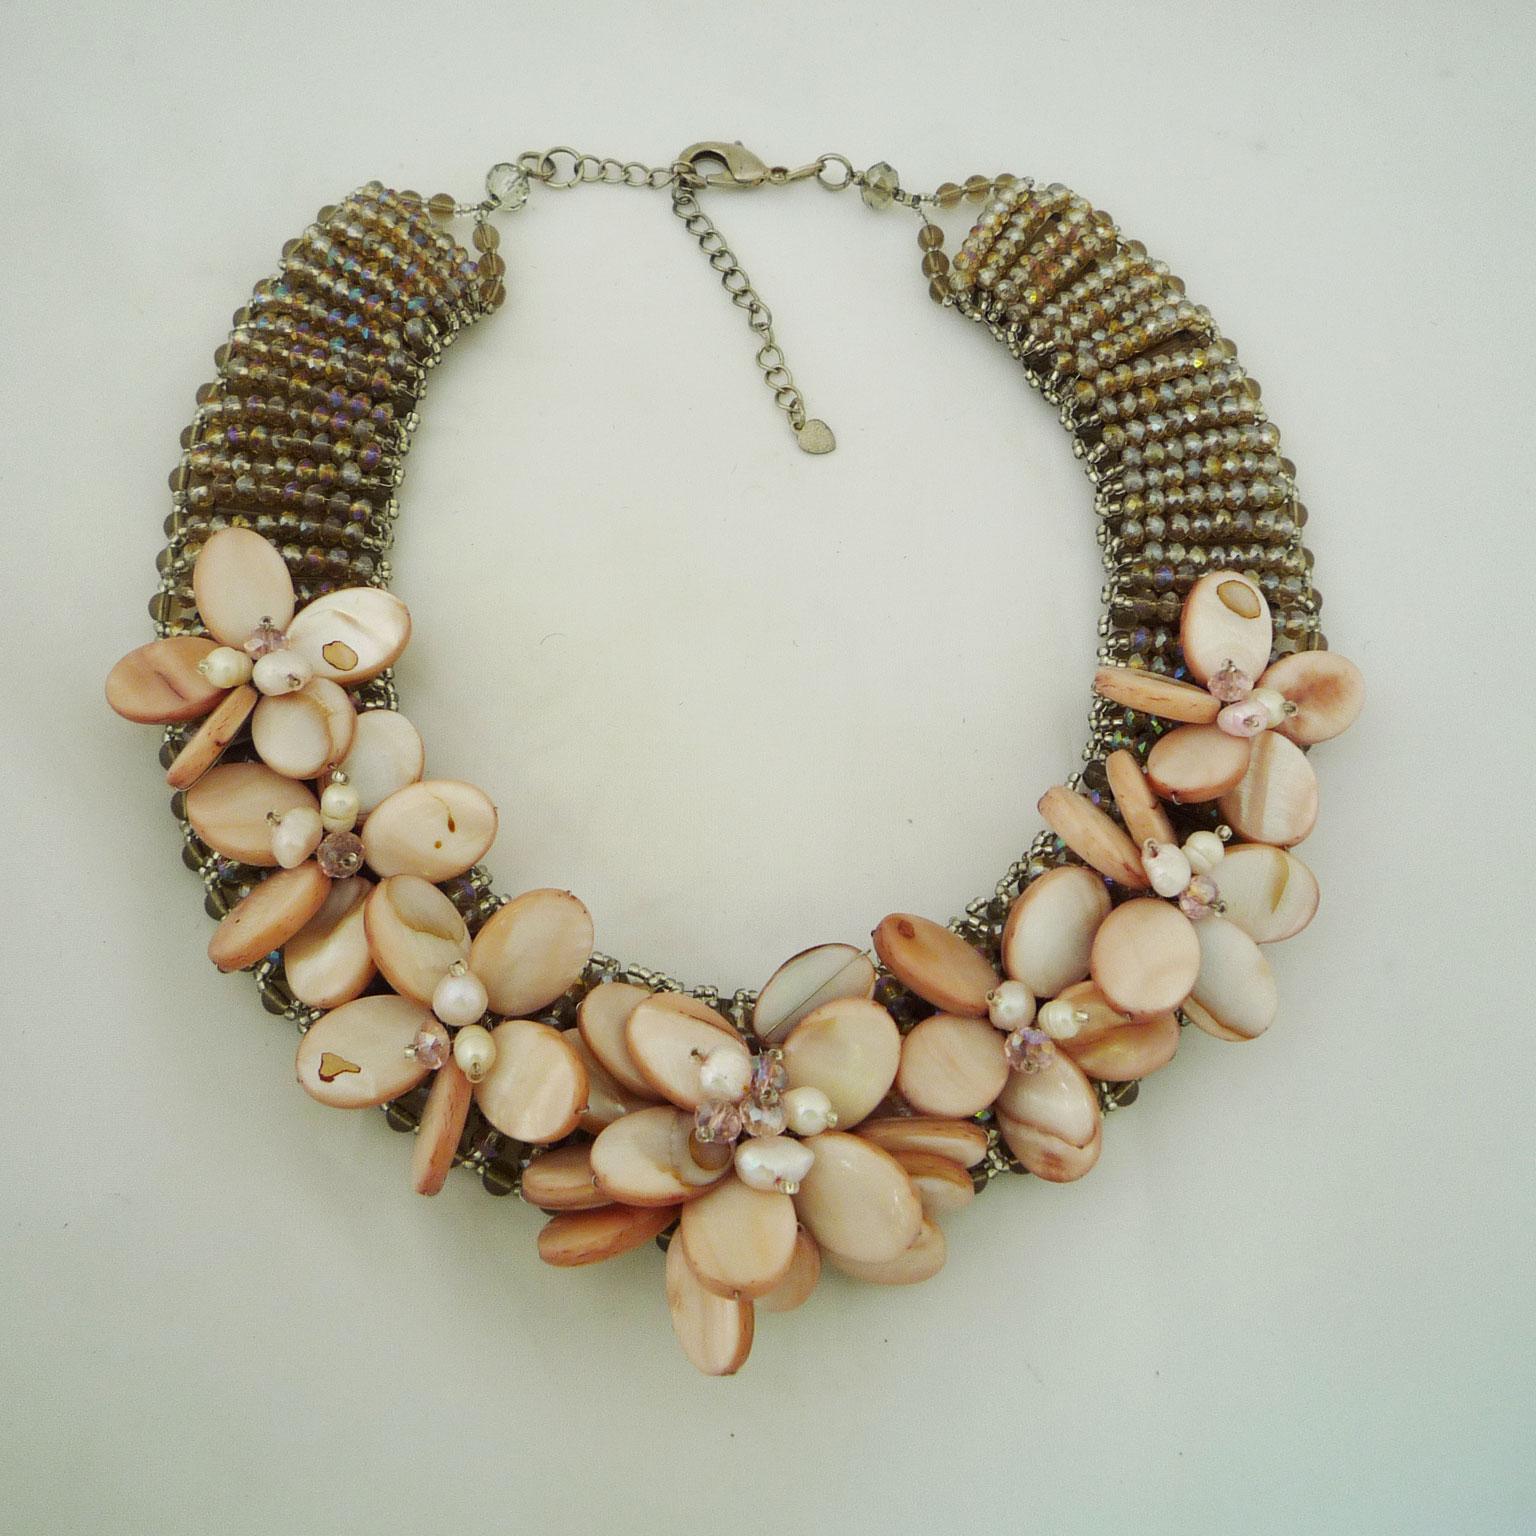 Women's Necklace made of mother-of-pearl, freshwater pearls and Swarovski pearls